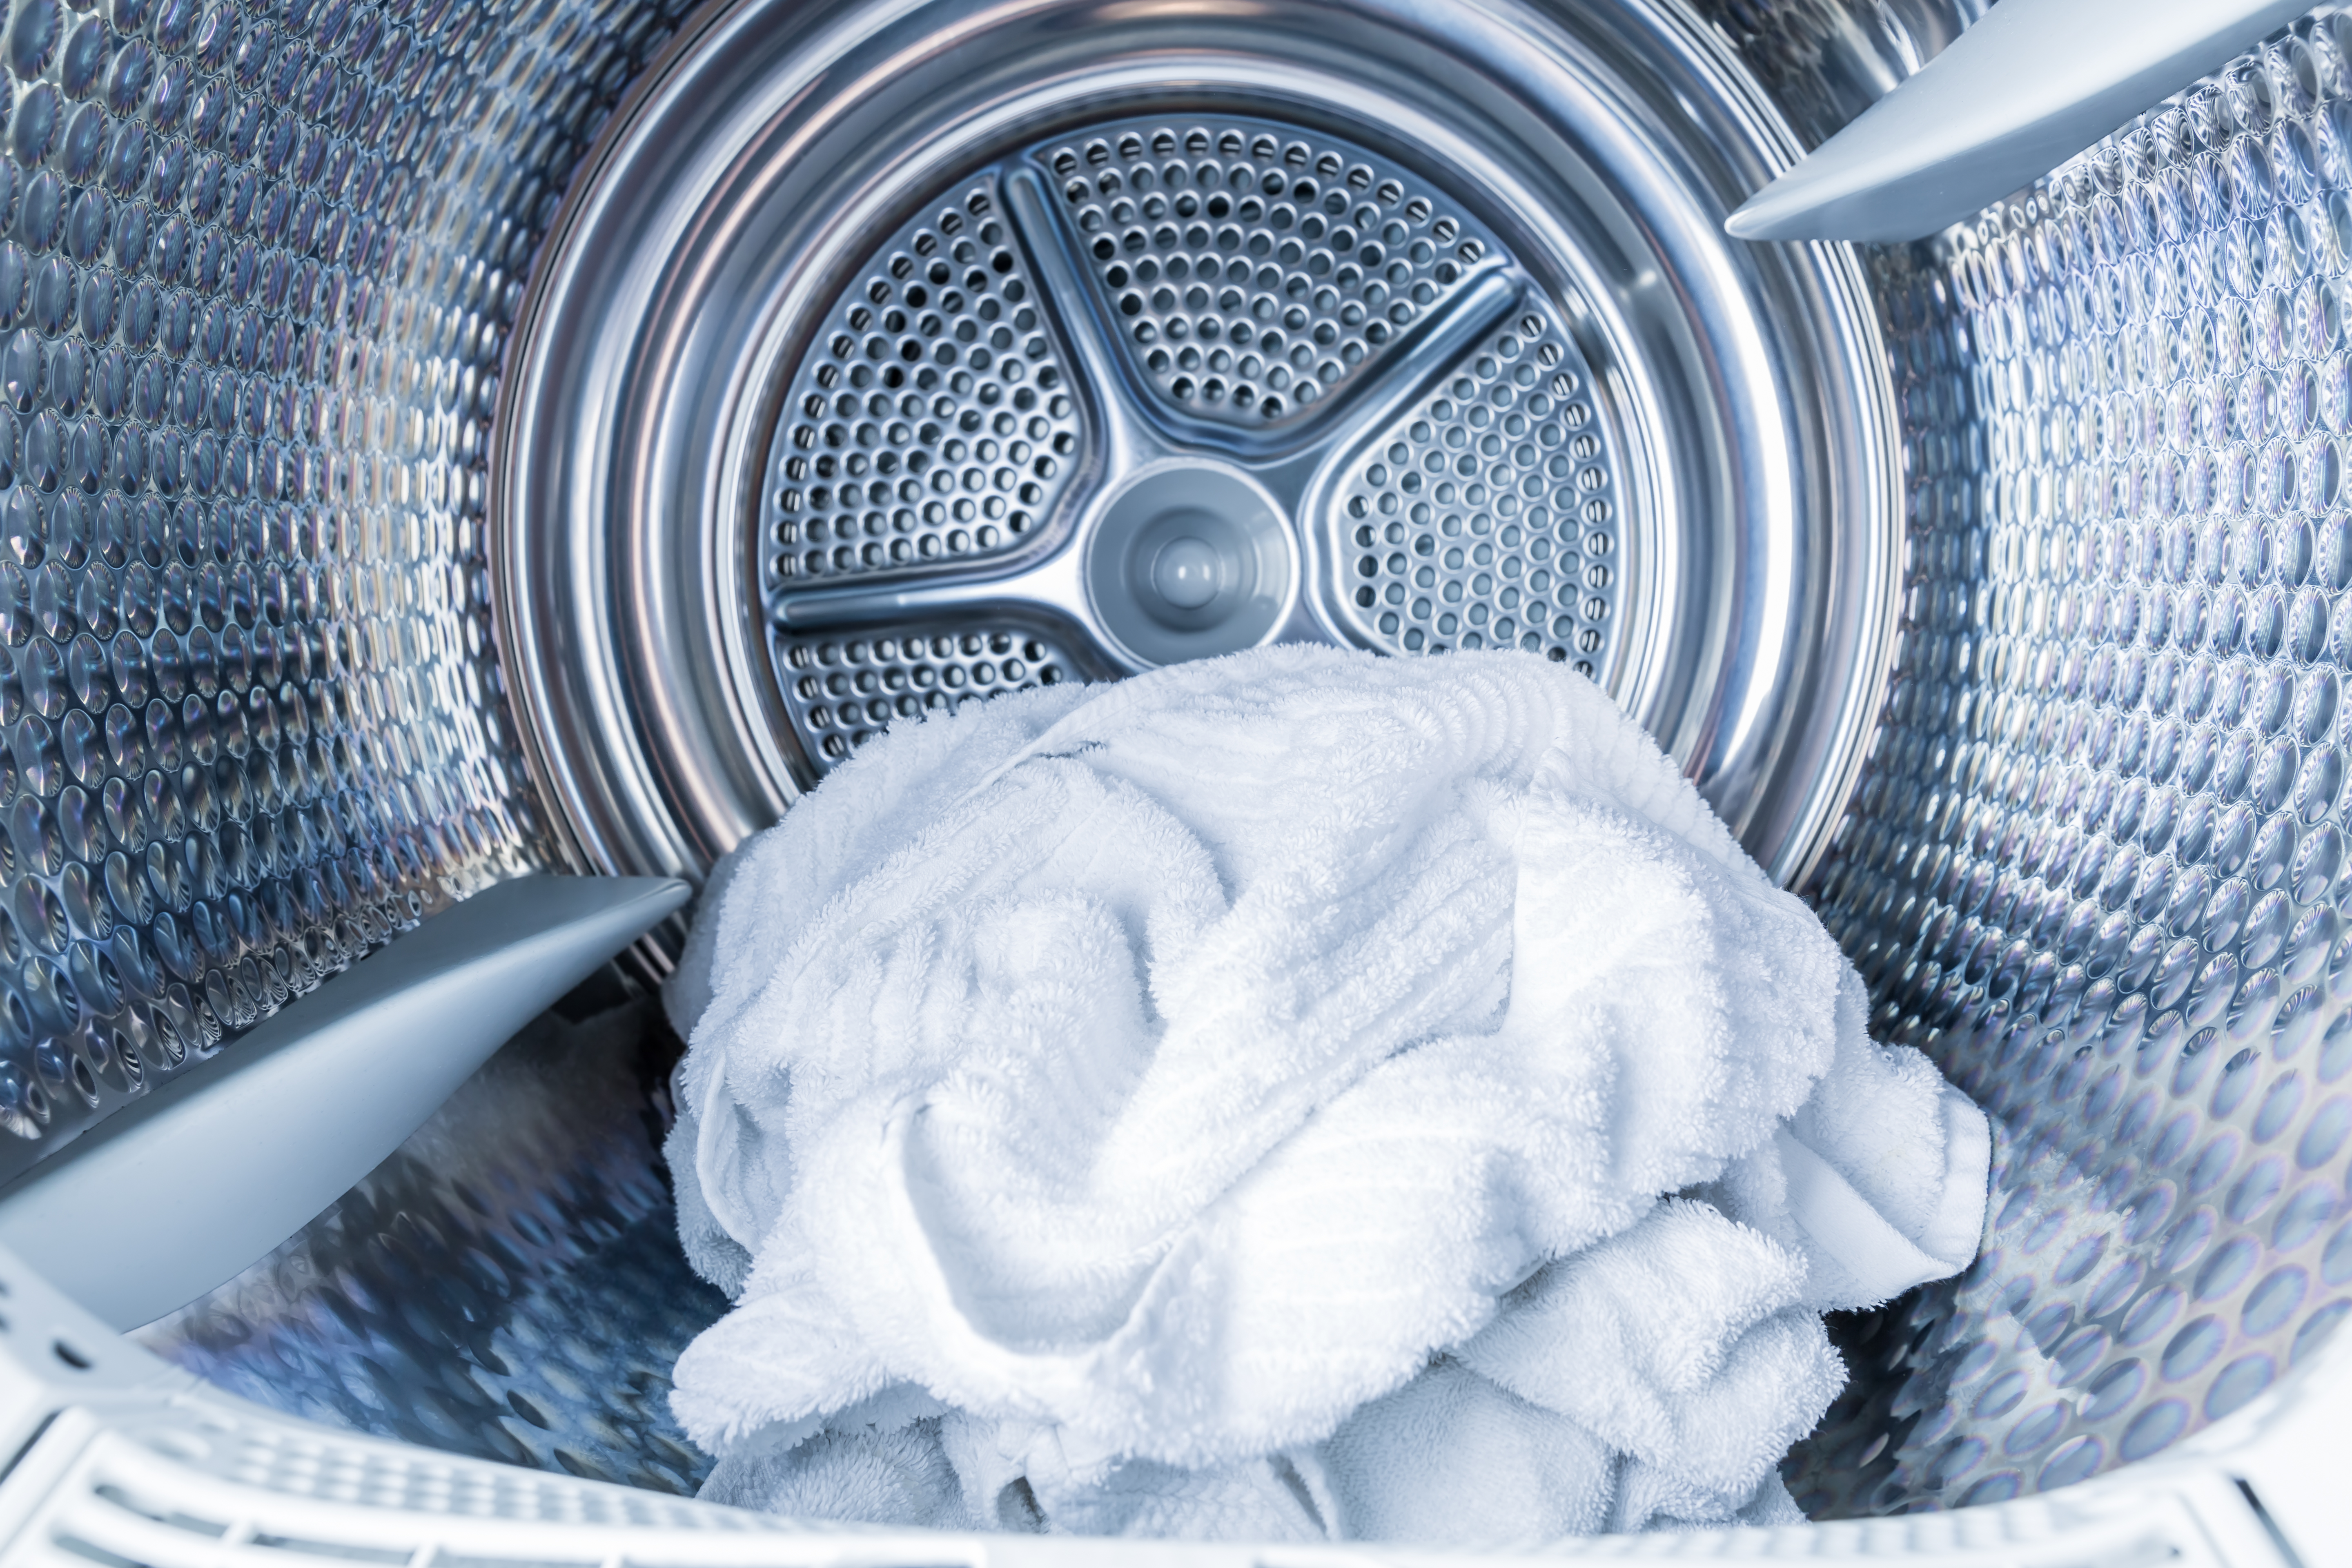 Dryer Vent Cleaning in Ottawa: Excessive Heat